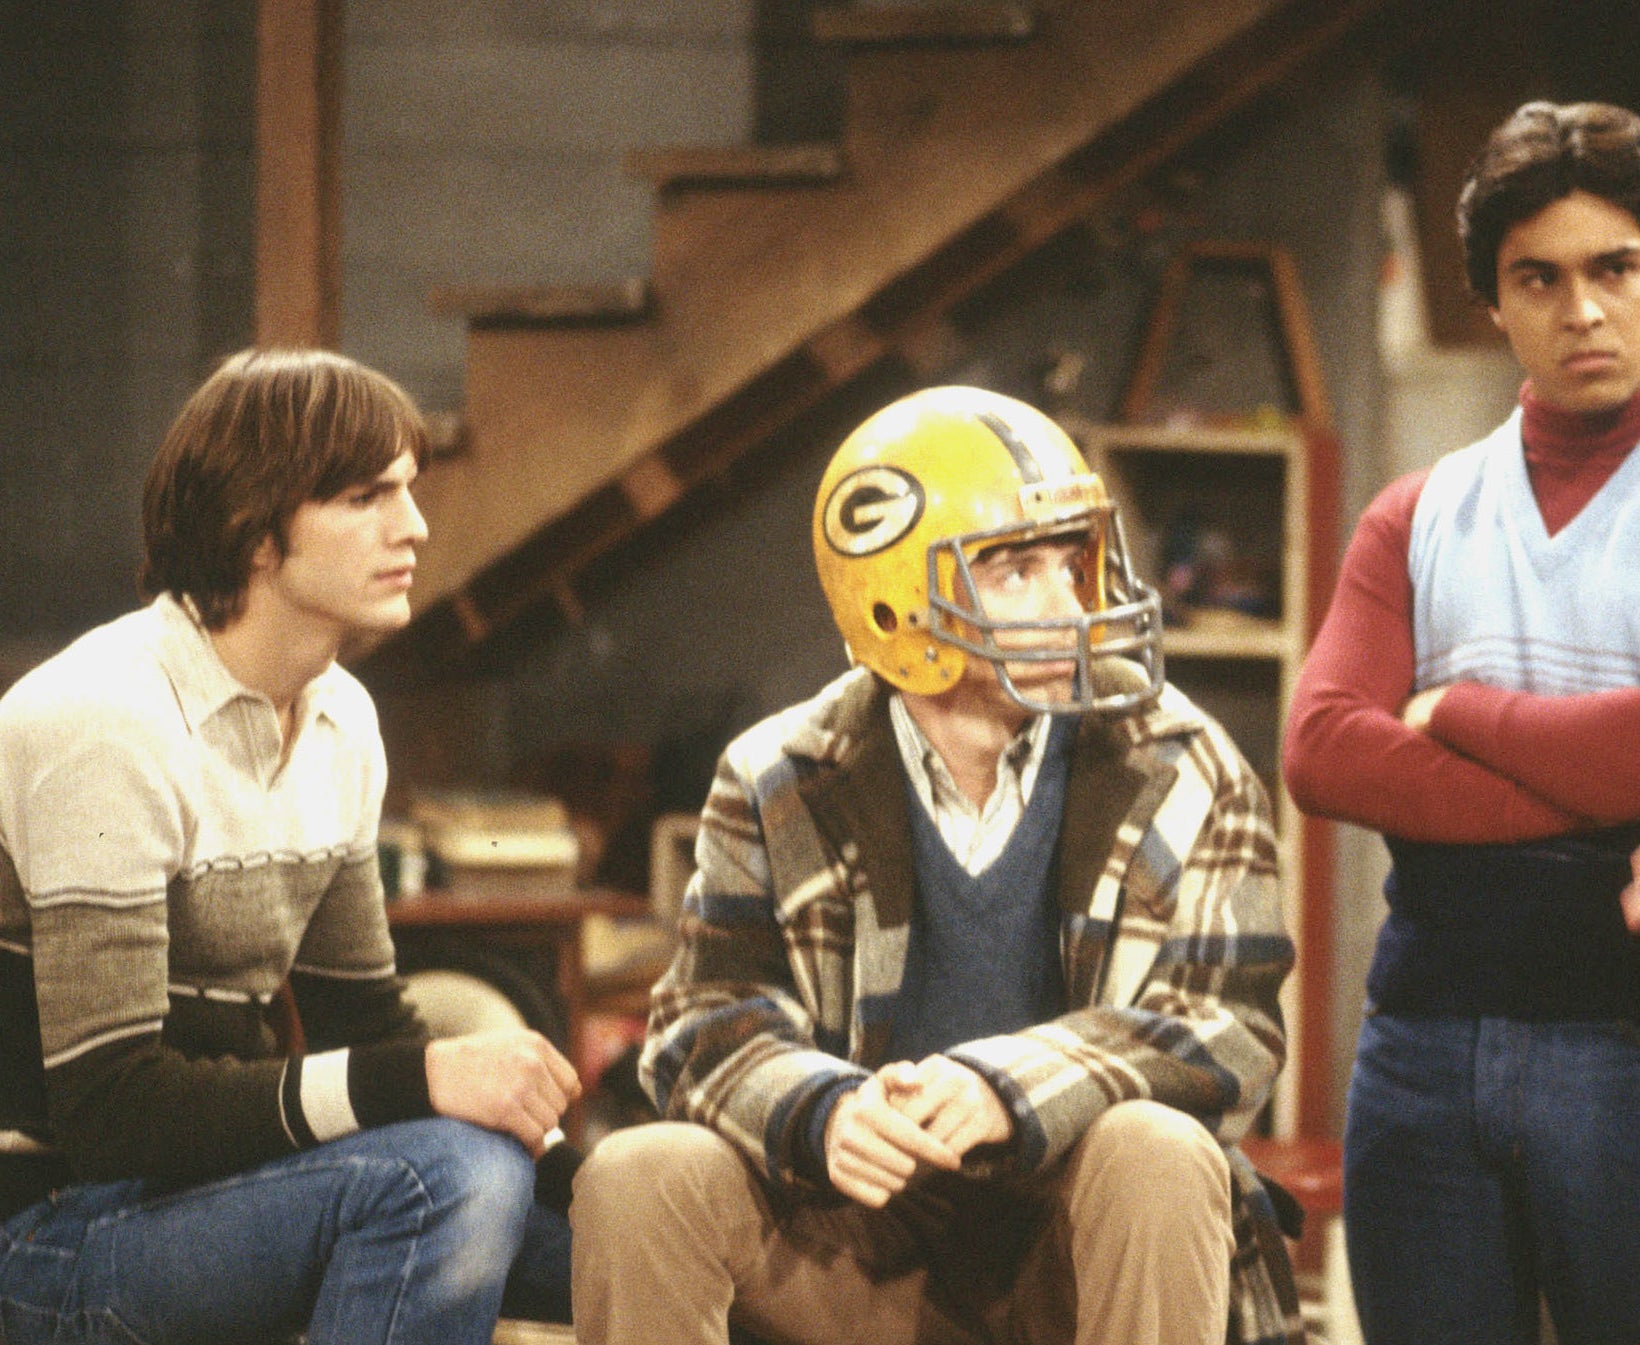 Kelso, Eric, and Fez in a basement